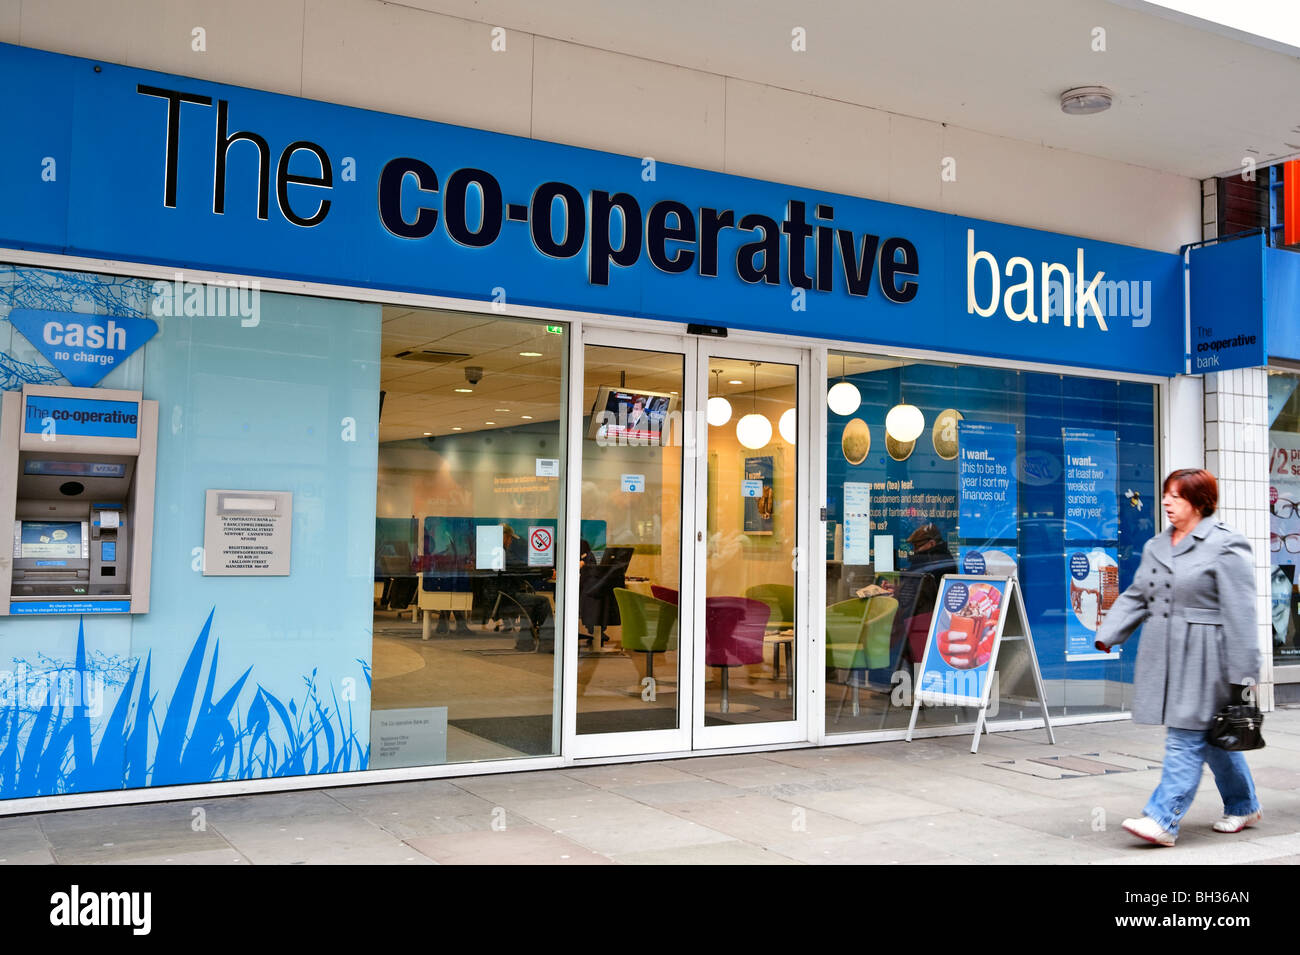 The Co-operative Bank in Newport, South Wales, UK. Co-operative Bank branch, GB. Stock Photo